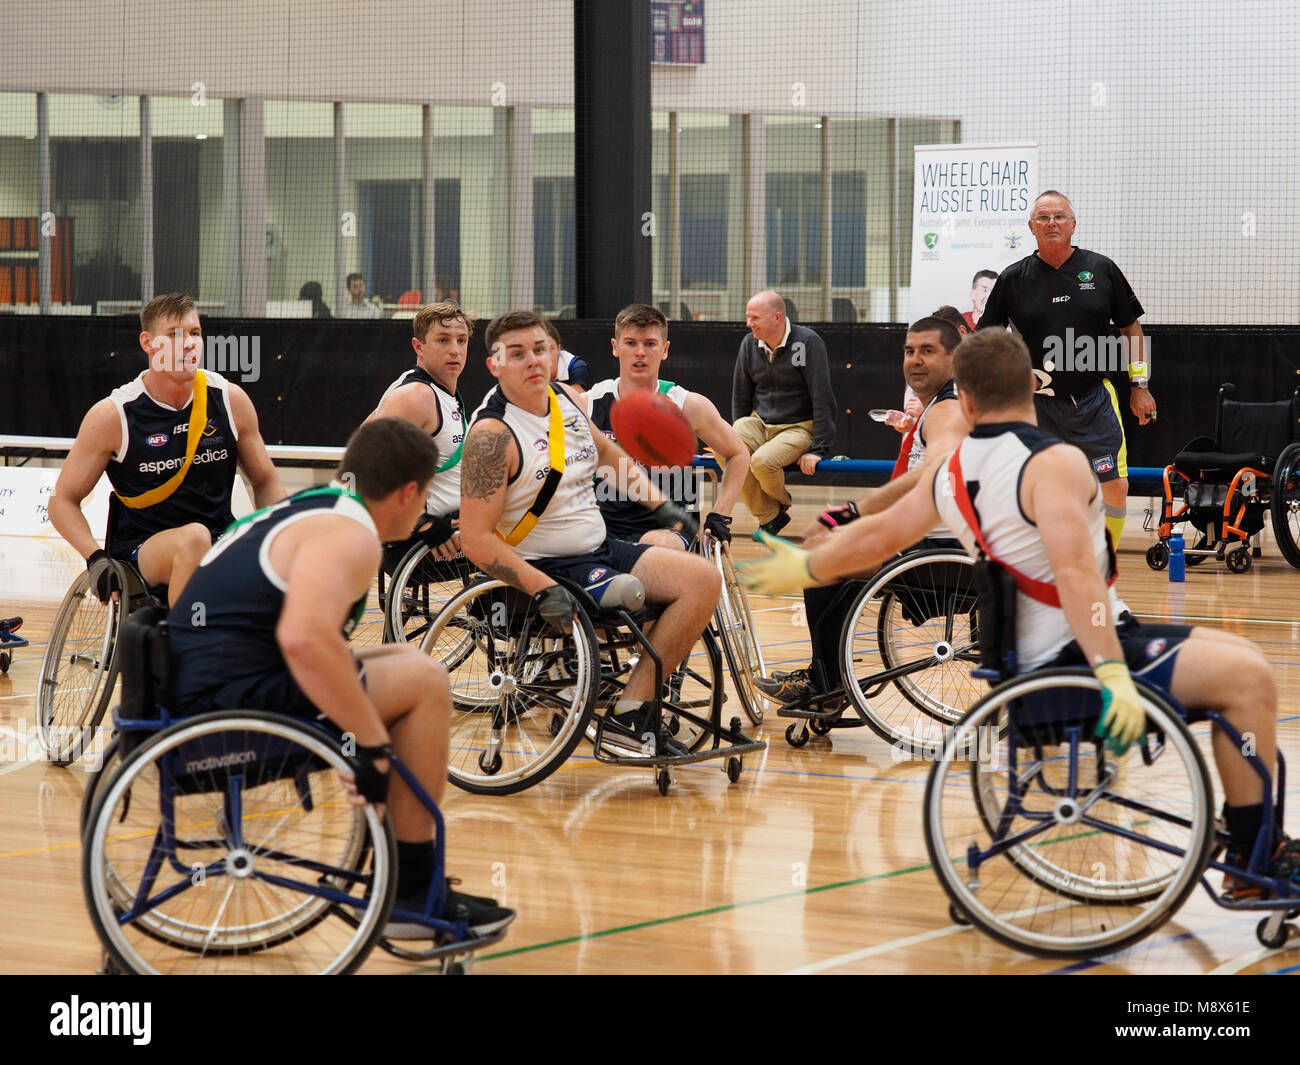 Melbourne, Australia. 21st March 2018. 2018 Wheelchair Aussie Rules National Championship, Australian Defence Force 1 vs Australian Defence Force 2. Credit W Forrester/Alamy Live News Stock Photo